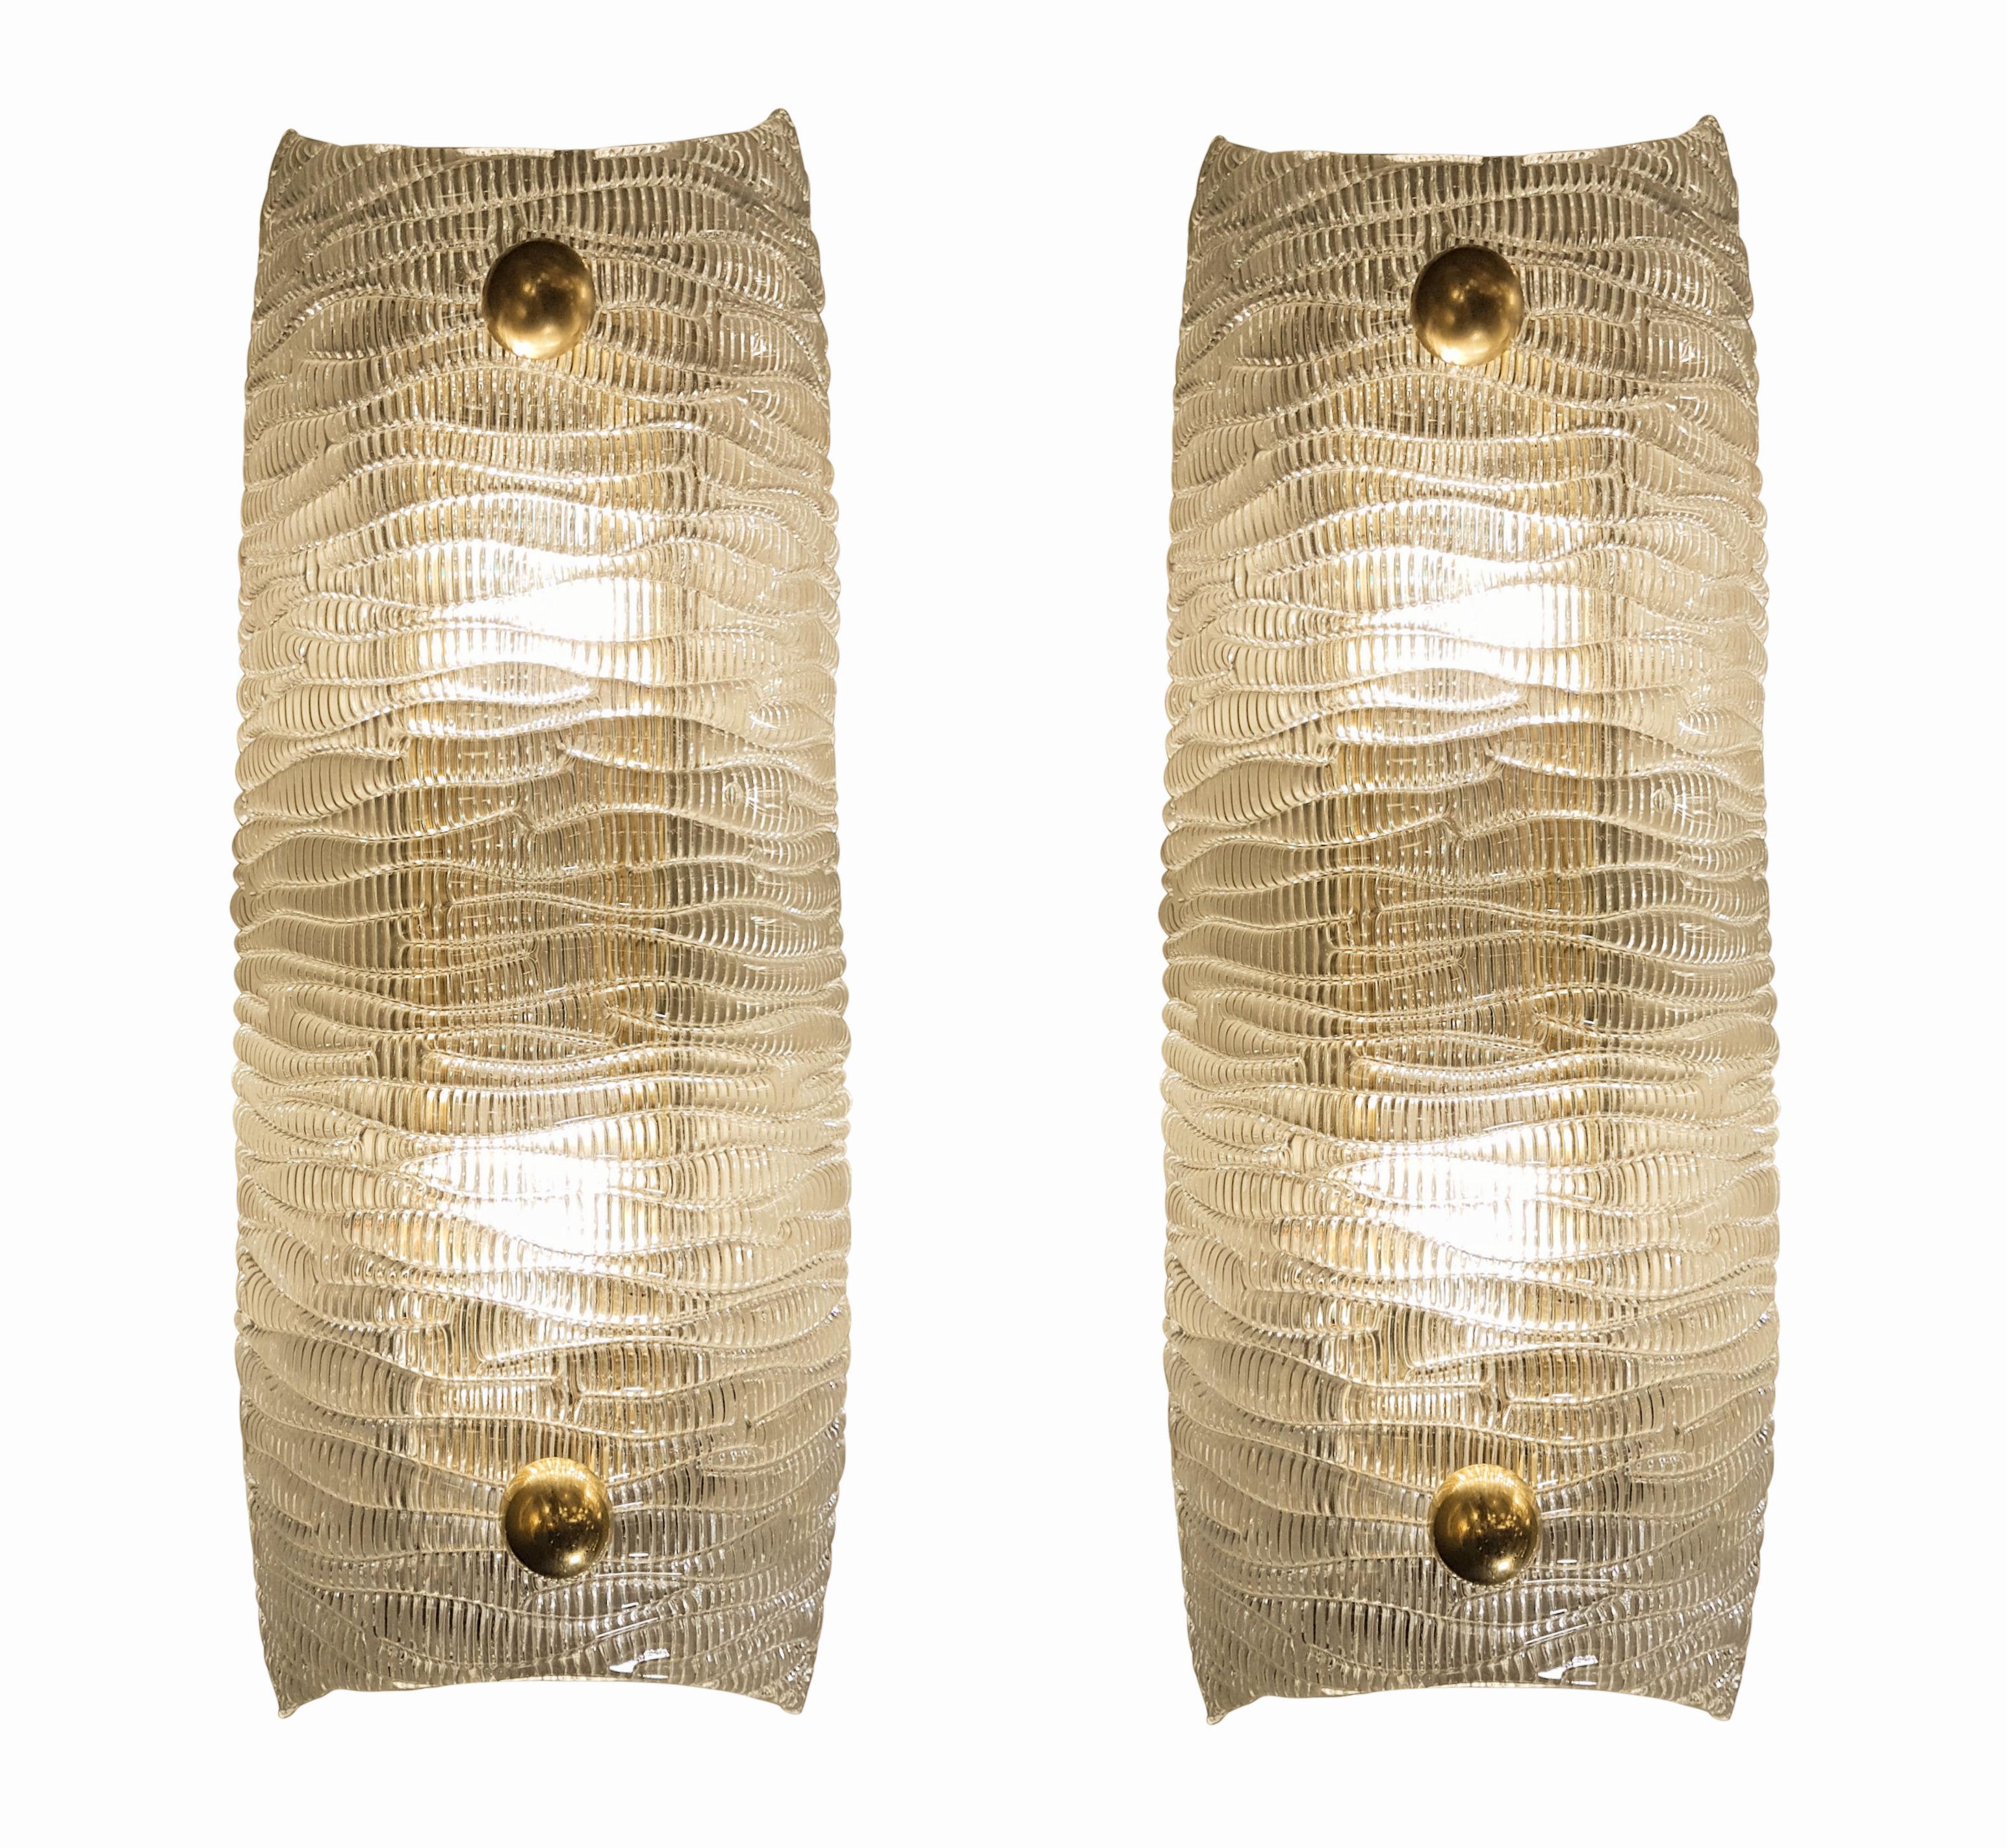 Pair of Mid-Century Modern clear textured Murano glass sconces, brass mounts.
The Murano glass is clear with a pattern in relief, which makes it translucent when lighted.
2 candelabra base lights each, rewired.
They are attributed to Barovier e